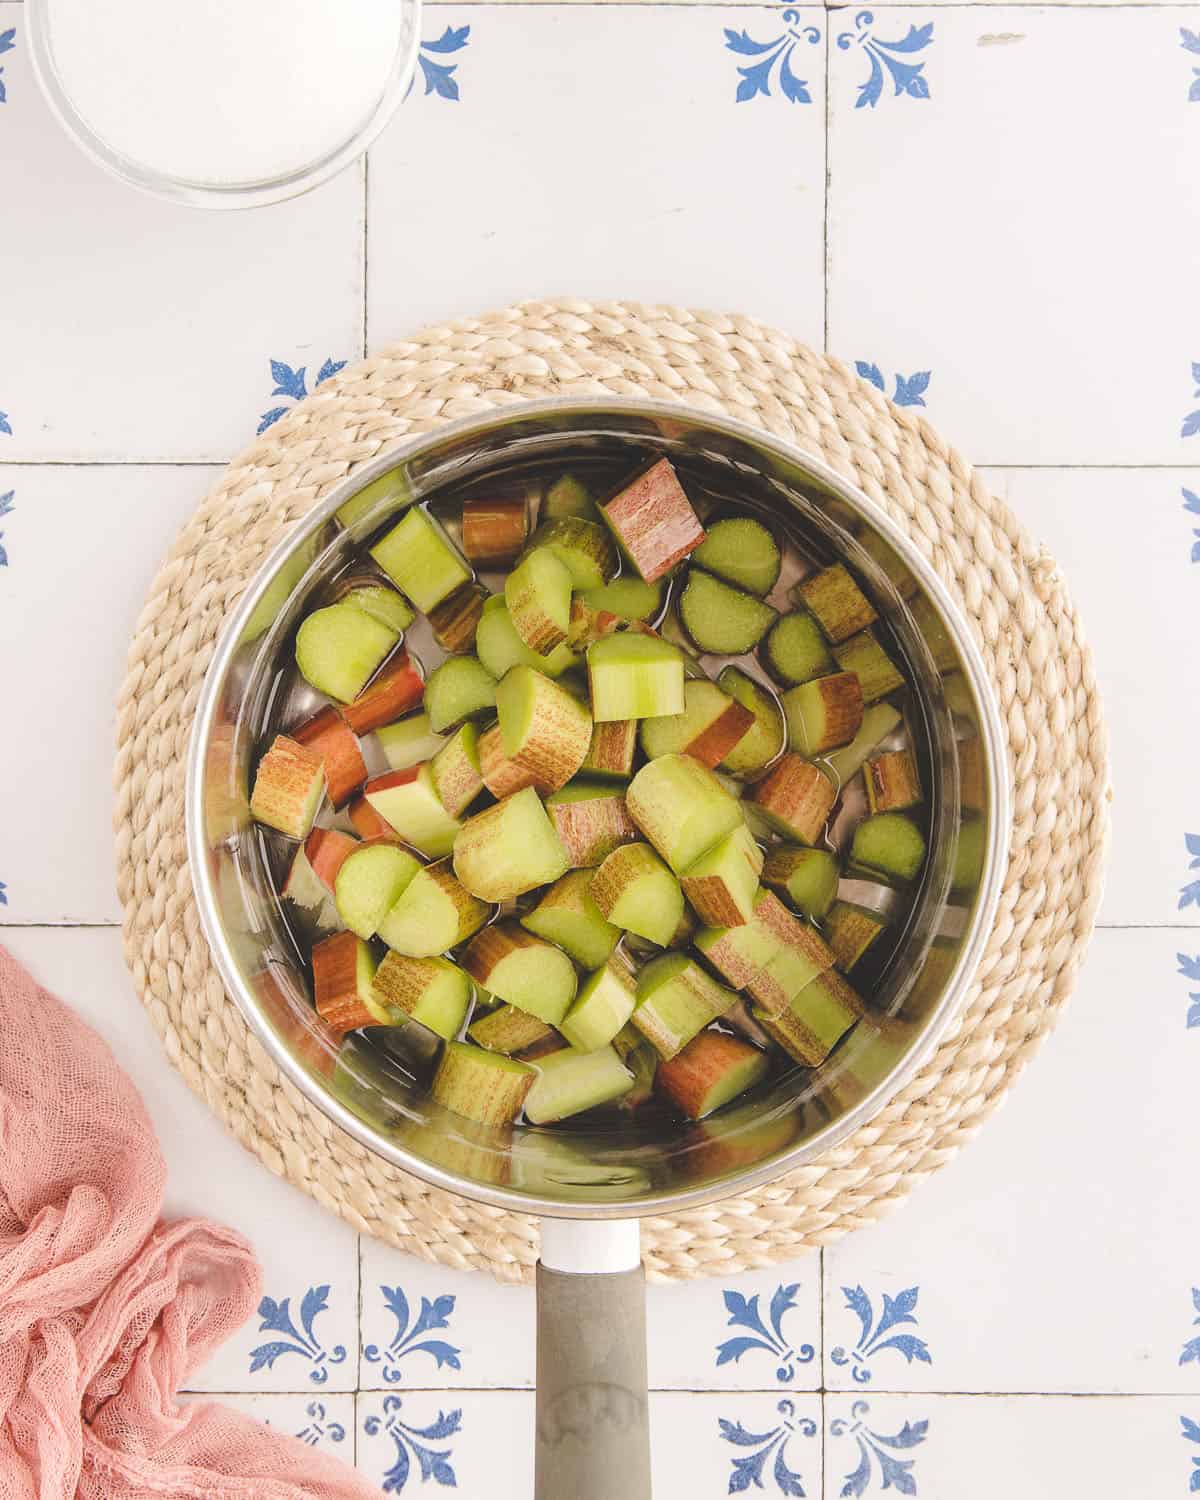 Rhubarb chopped in a pan sitting on a woven circle trivet, on a white surface with blue designs. 